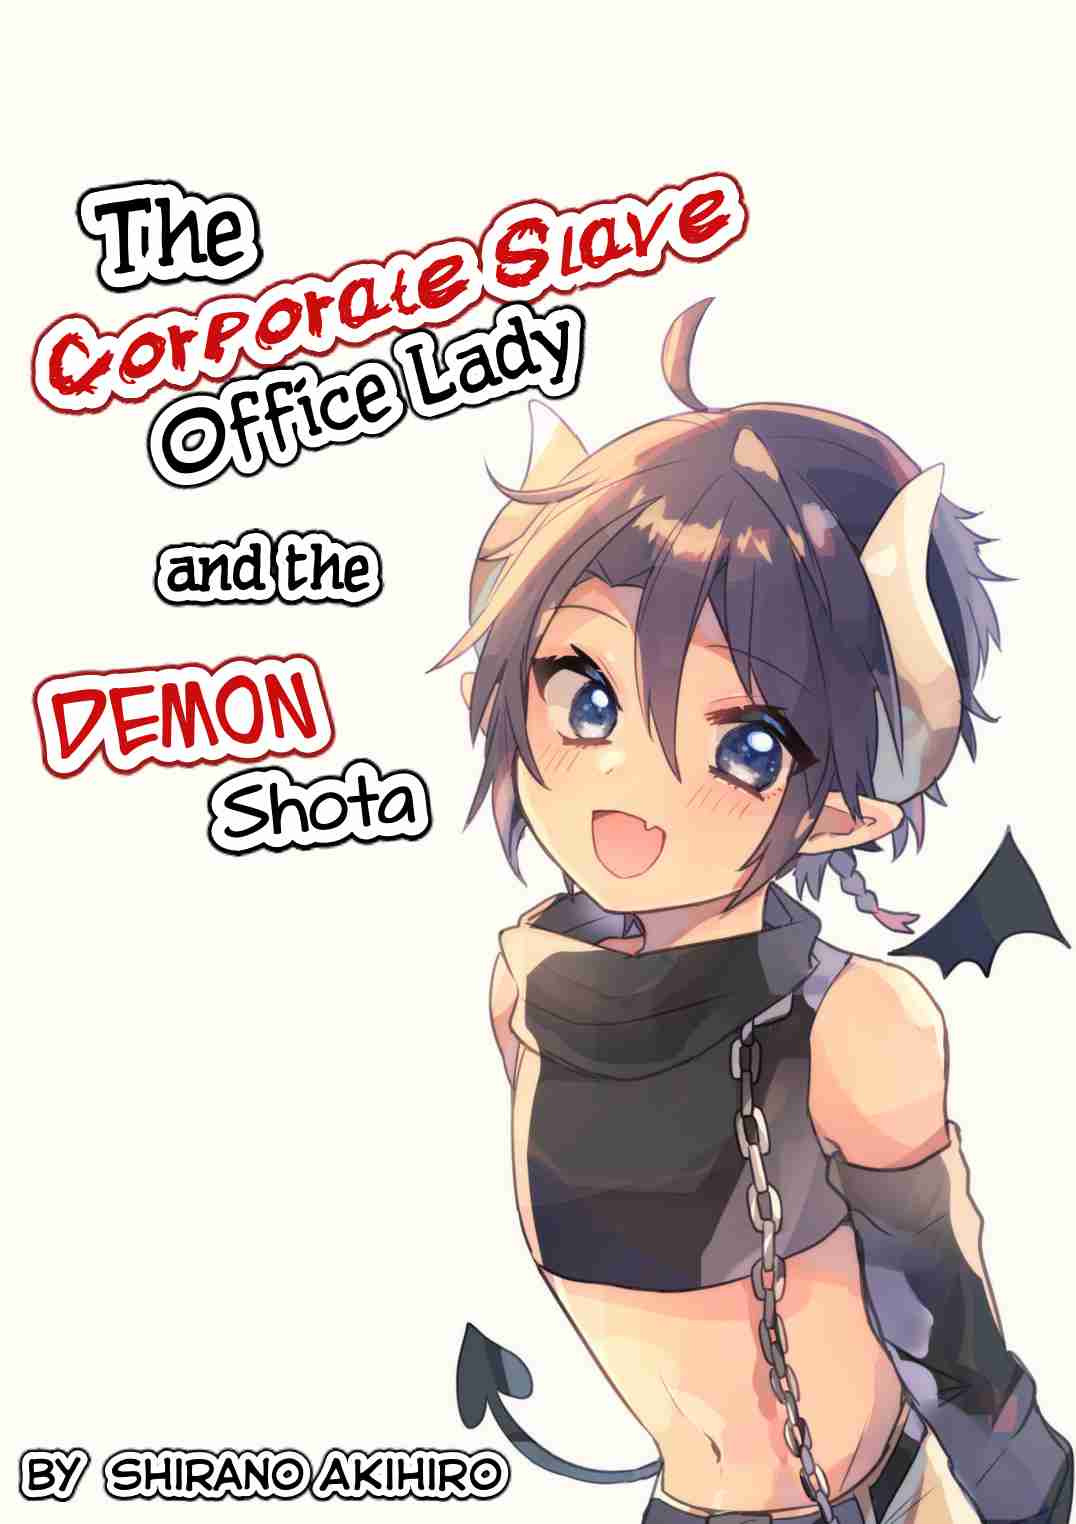 The Corporate slave OL and the demon shota Ch. 1 The corporate slave wanted to destroy her black company, so, she summoned a demon, but he turned out different than she expected